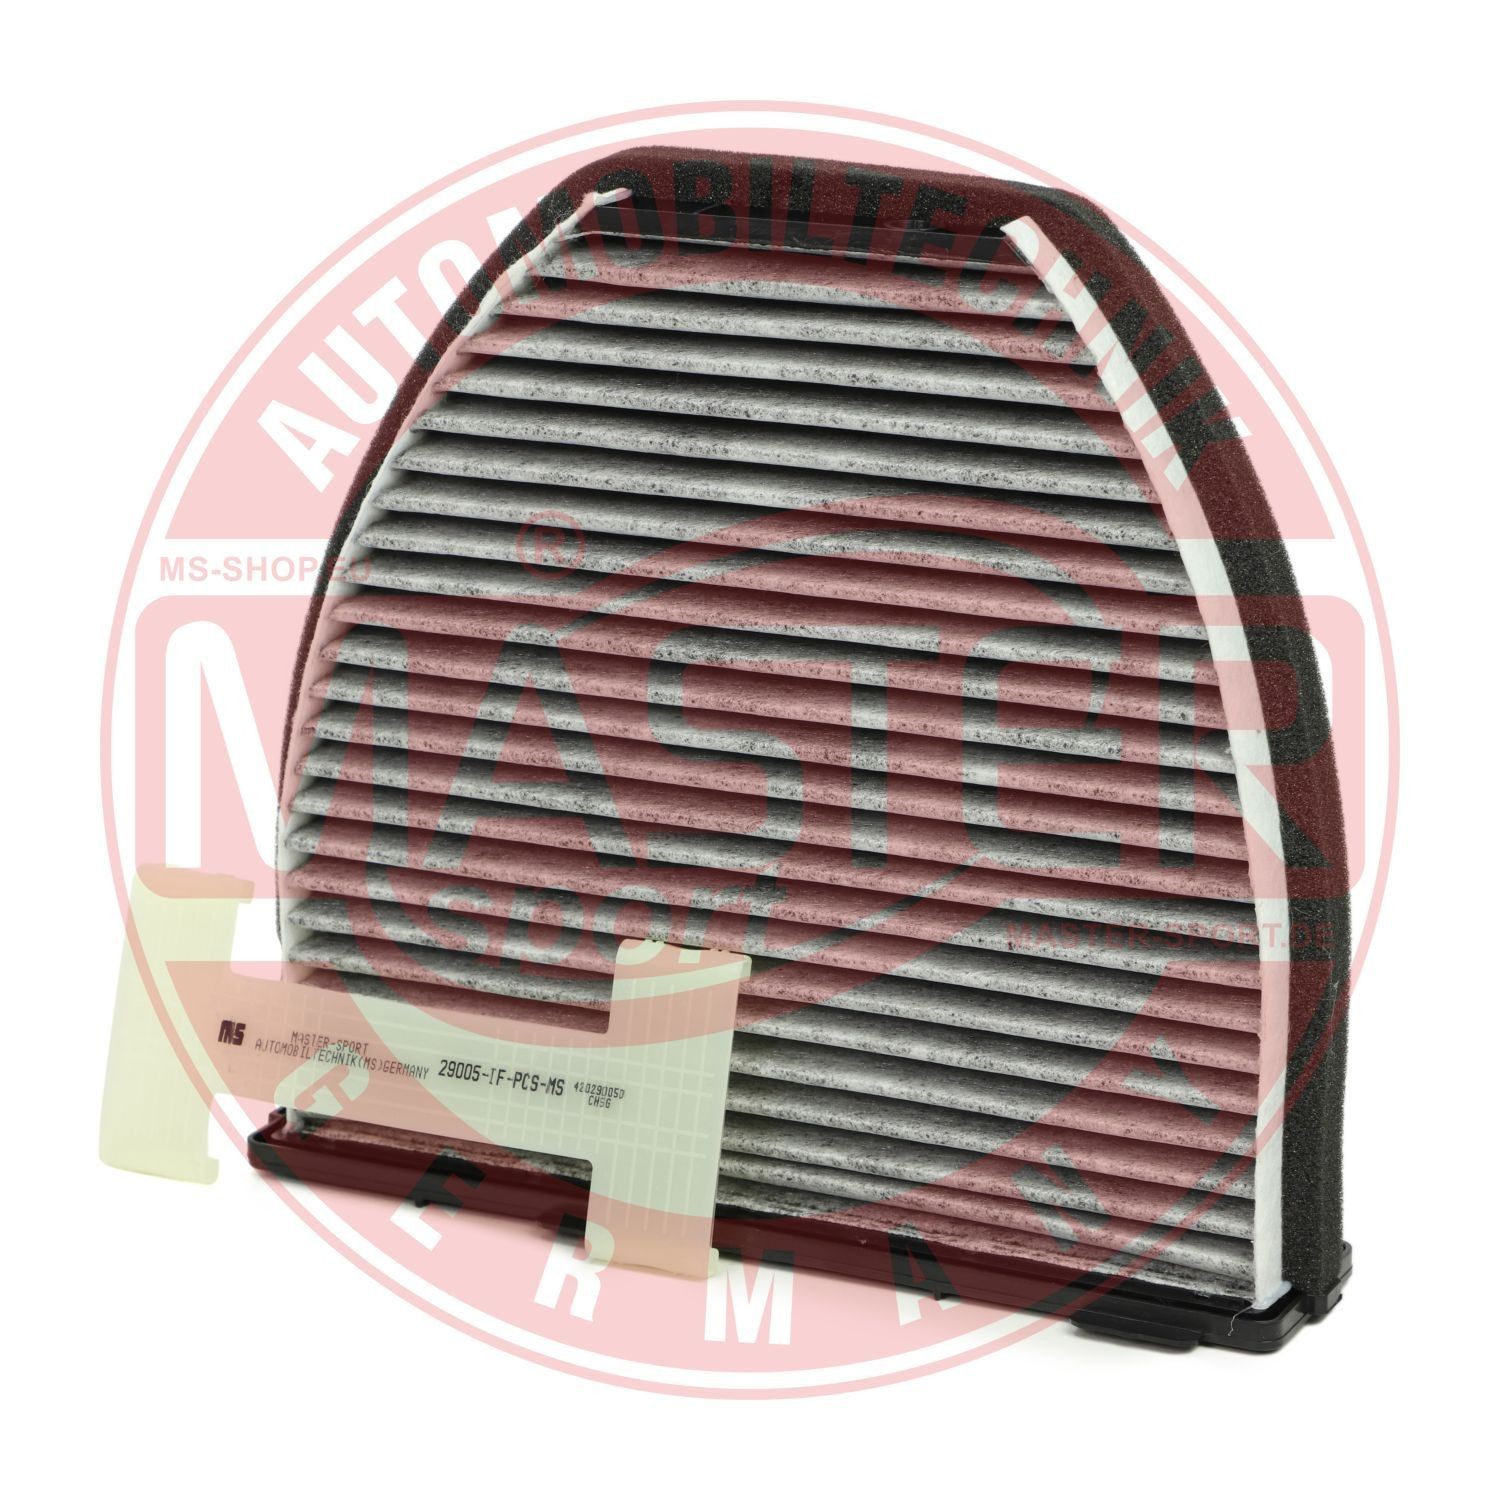 MASTER-SPORT Air conditioner filter MERCEDES-BENZ E-Class Coupe (C207) new 29005/1-IF-PCS-MS